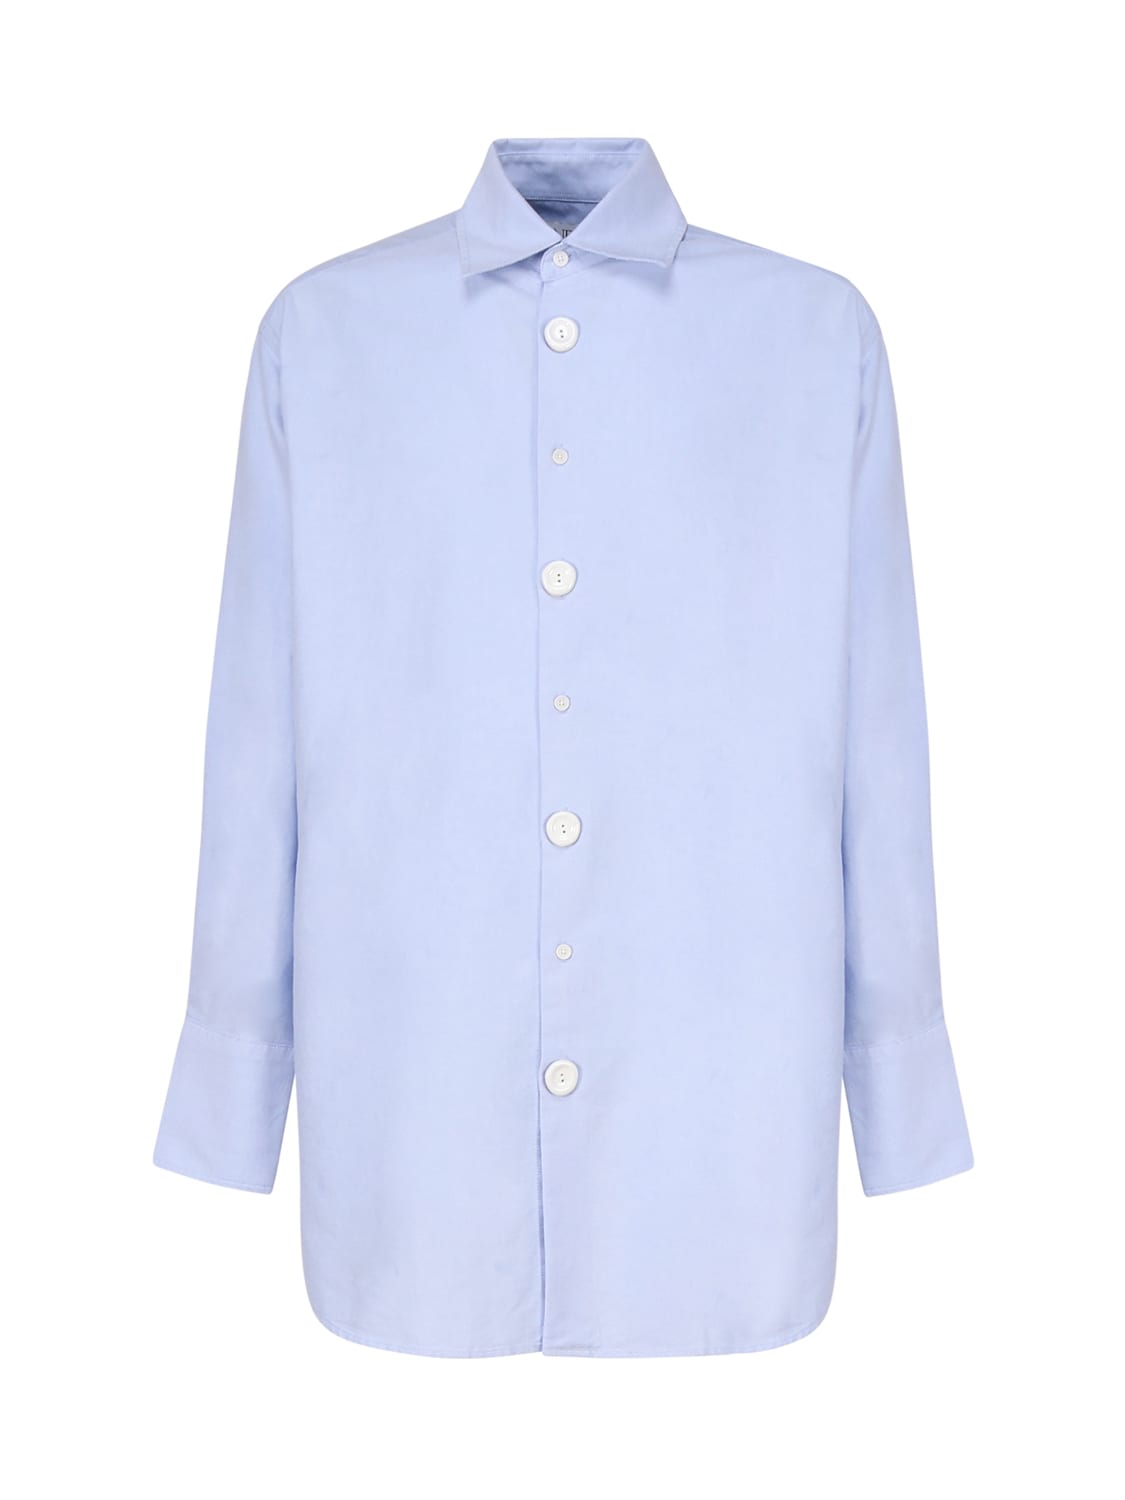 JW ANDERSON SHIRT WITH ANCHOR EMBROIDERY